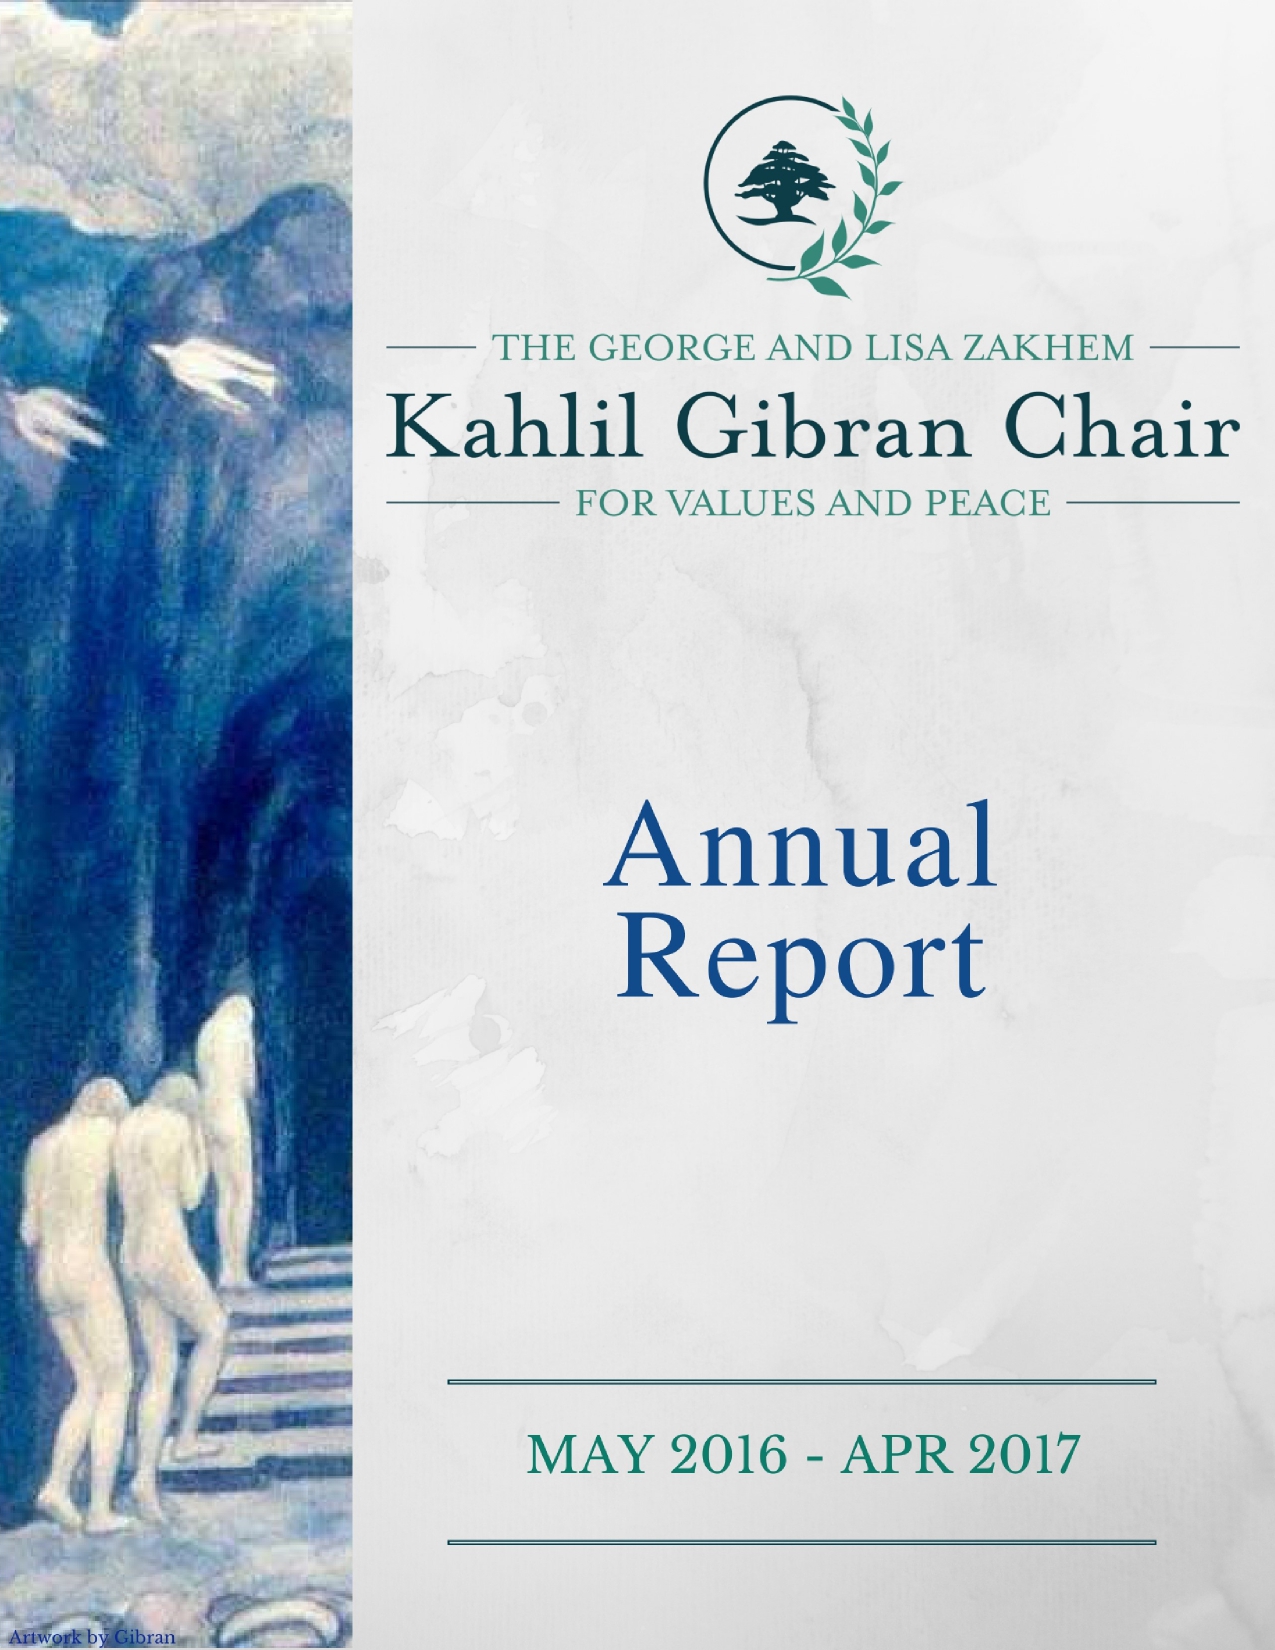 Annual Report, The George and Lisa Zakhem Kahlil Gibran Chair for Values and Peace, May 2016 - April 2017.